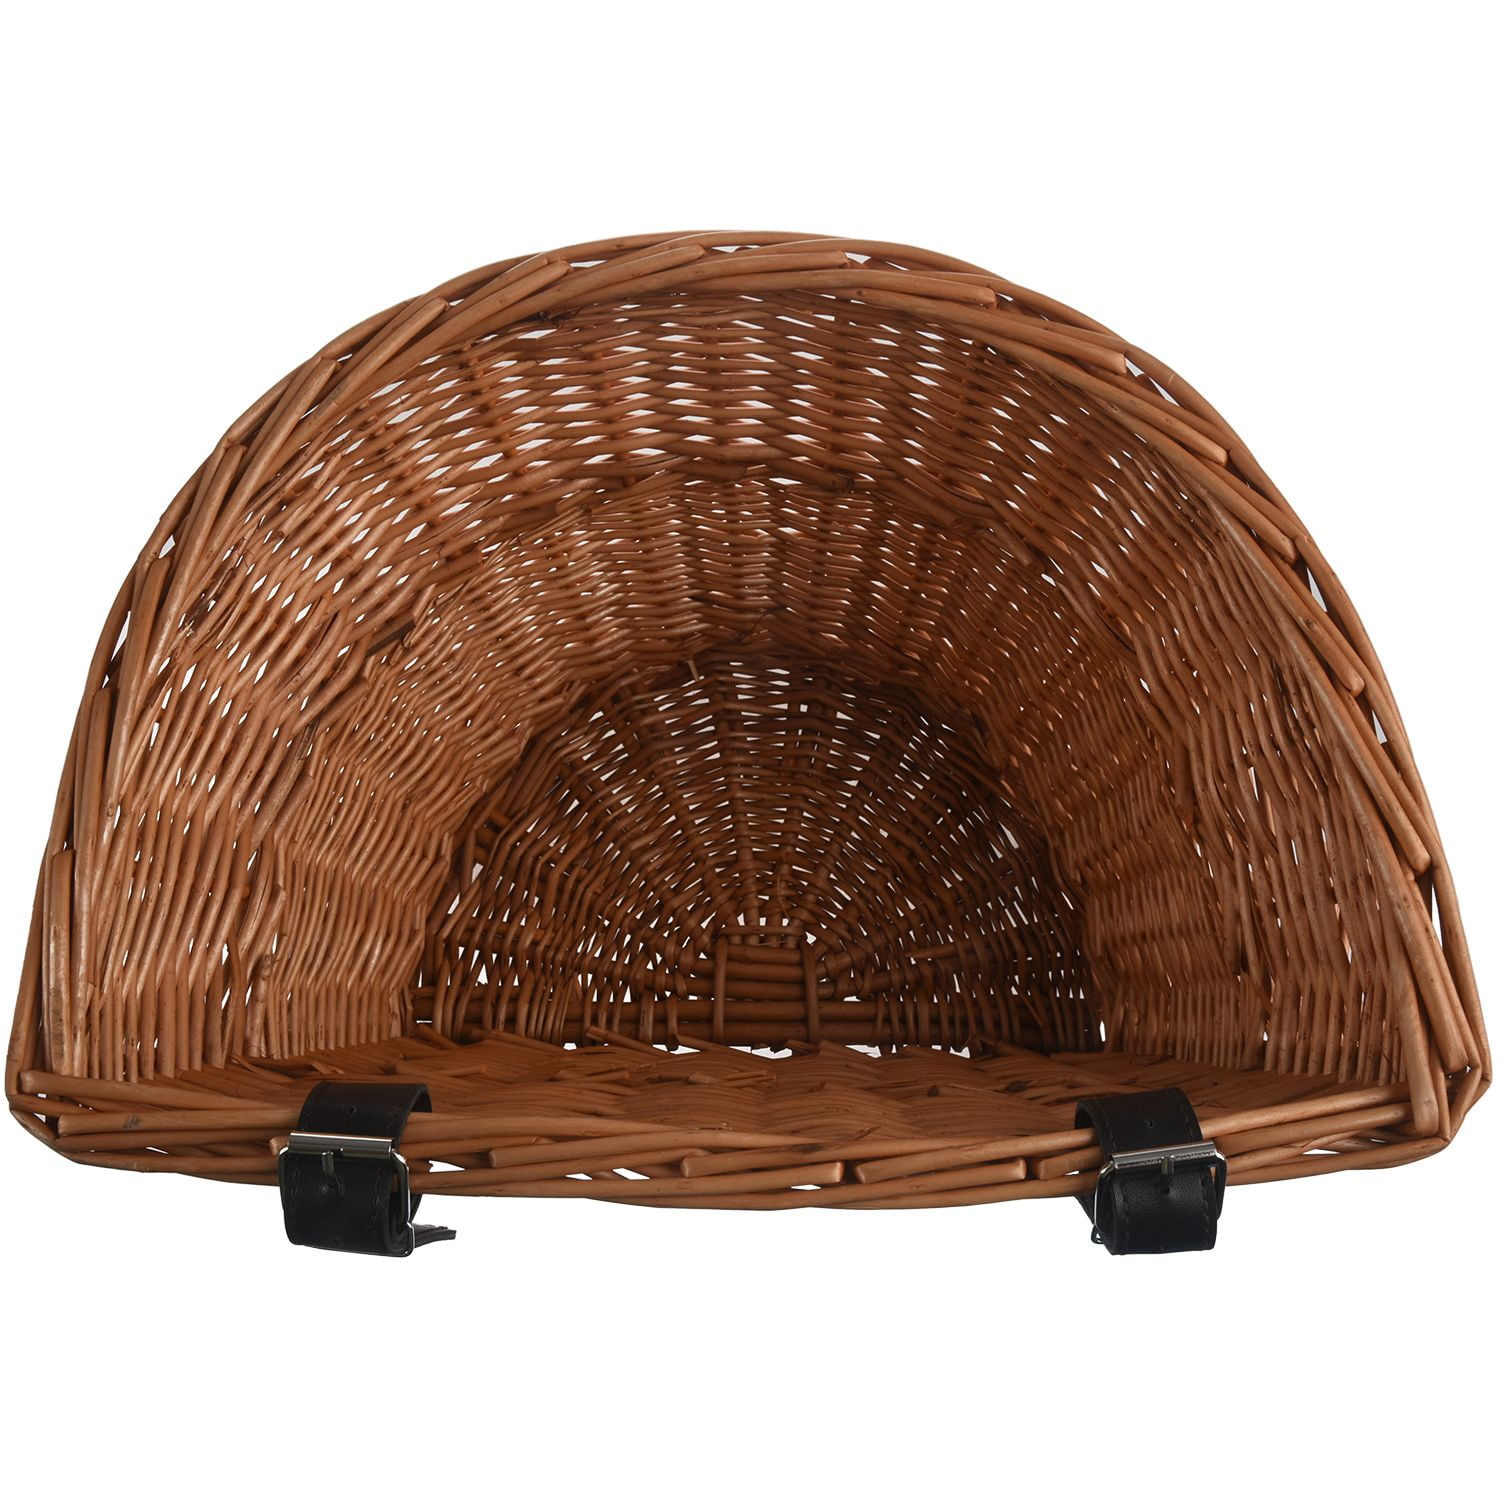 Mefeny Retro Handmade Wicker Bicycle Front Basket with Leather Straps